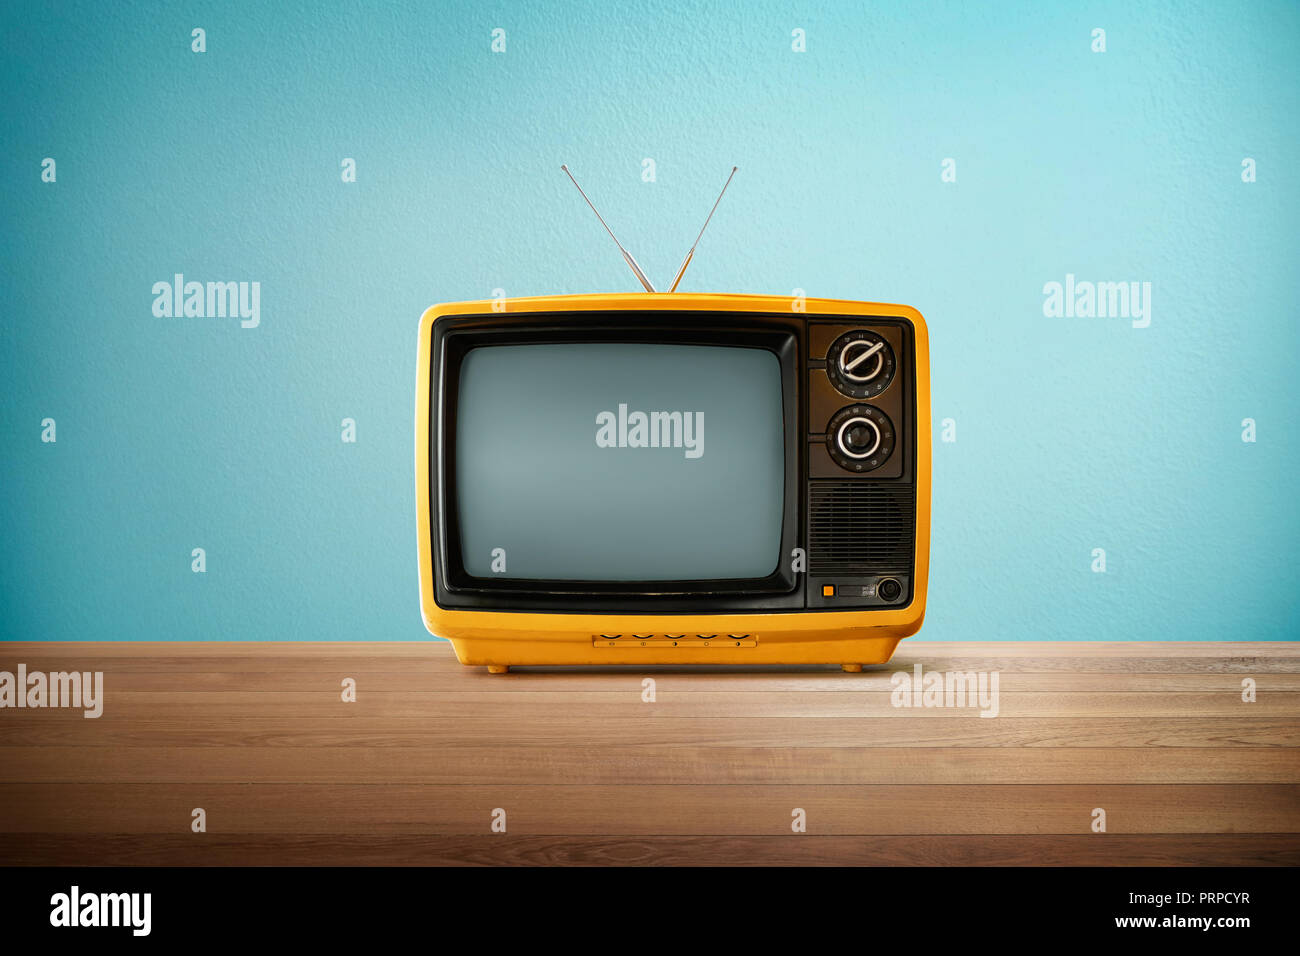 Yellow Orange color old vintage retro Television on wood table with mint blue background . Stock Photo